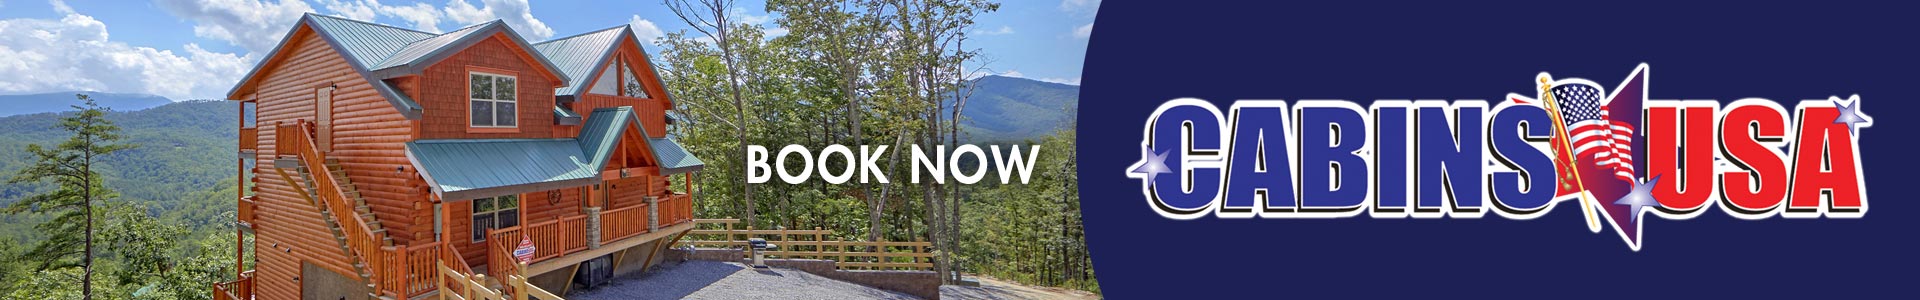 Ad - Cabins USA: Click to book now.